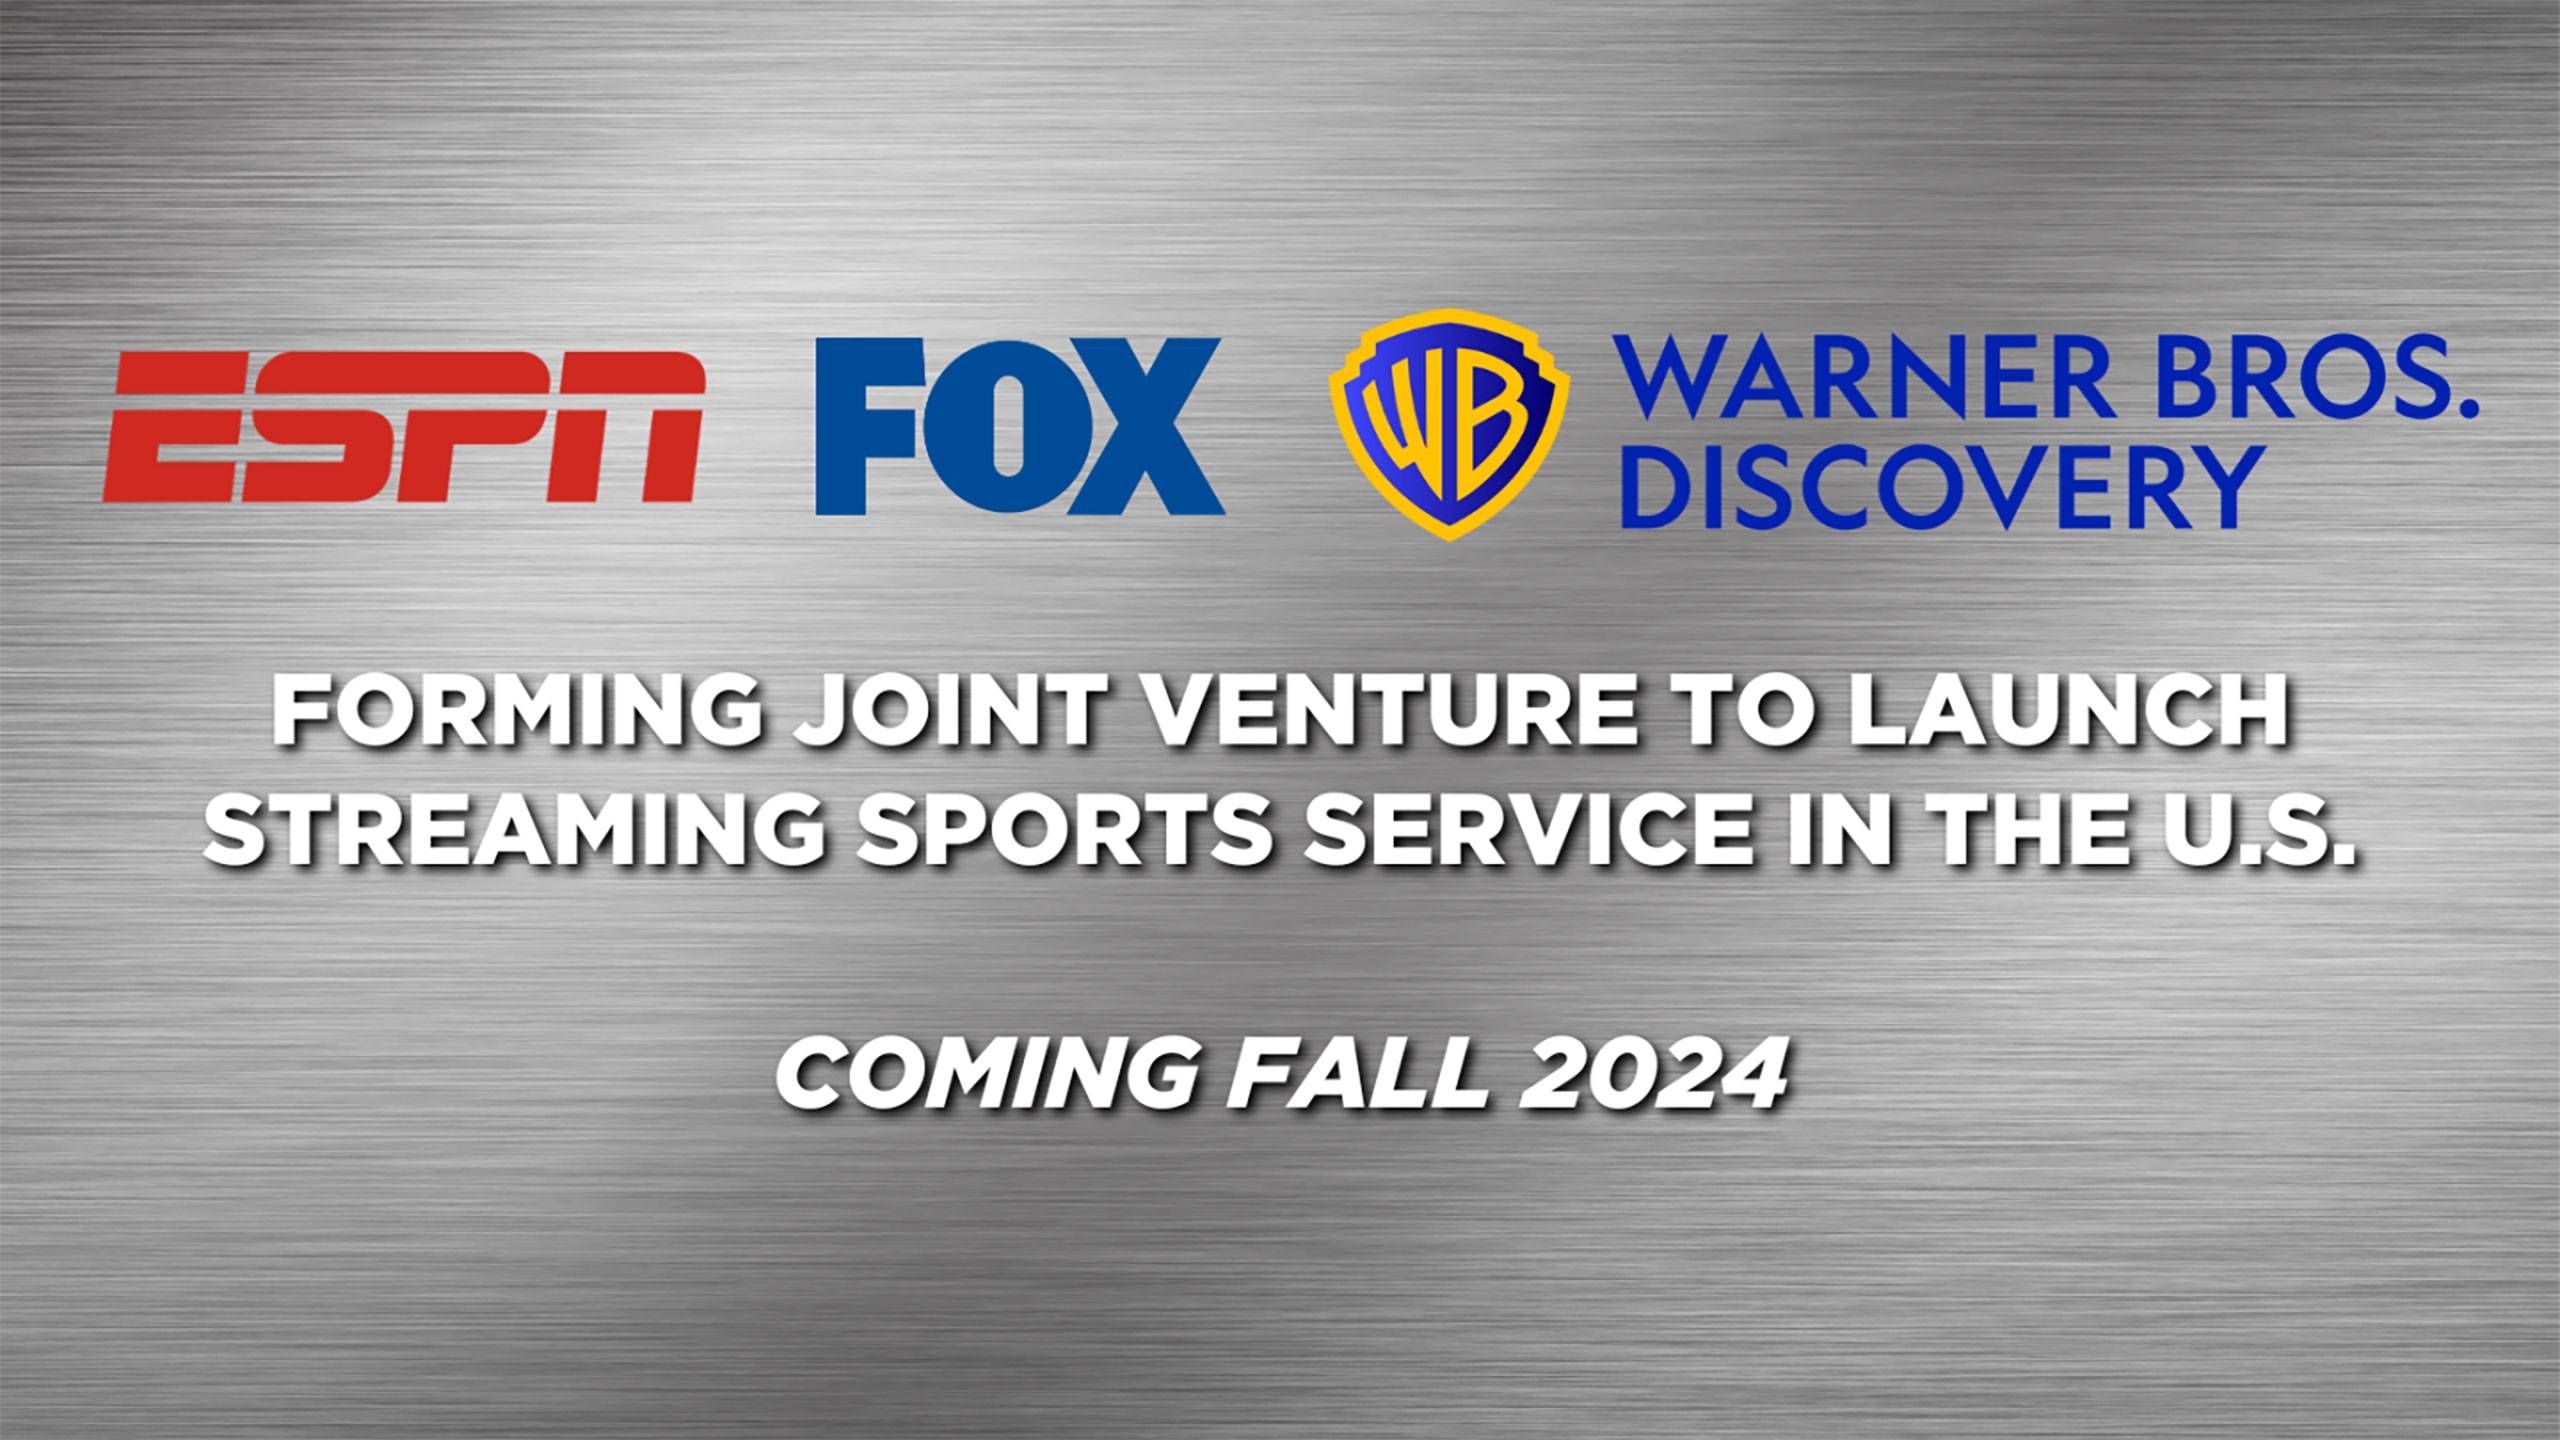 ESPN, Fox, and Warner Bros. Discovery to launch joint sports streaming platform